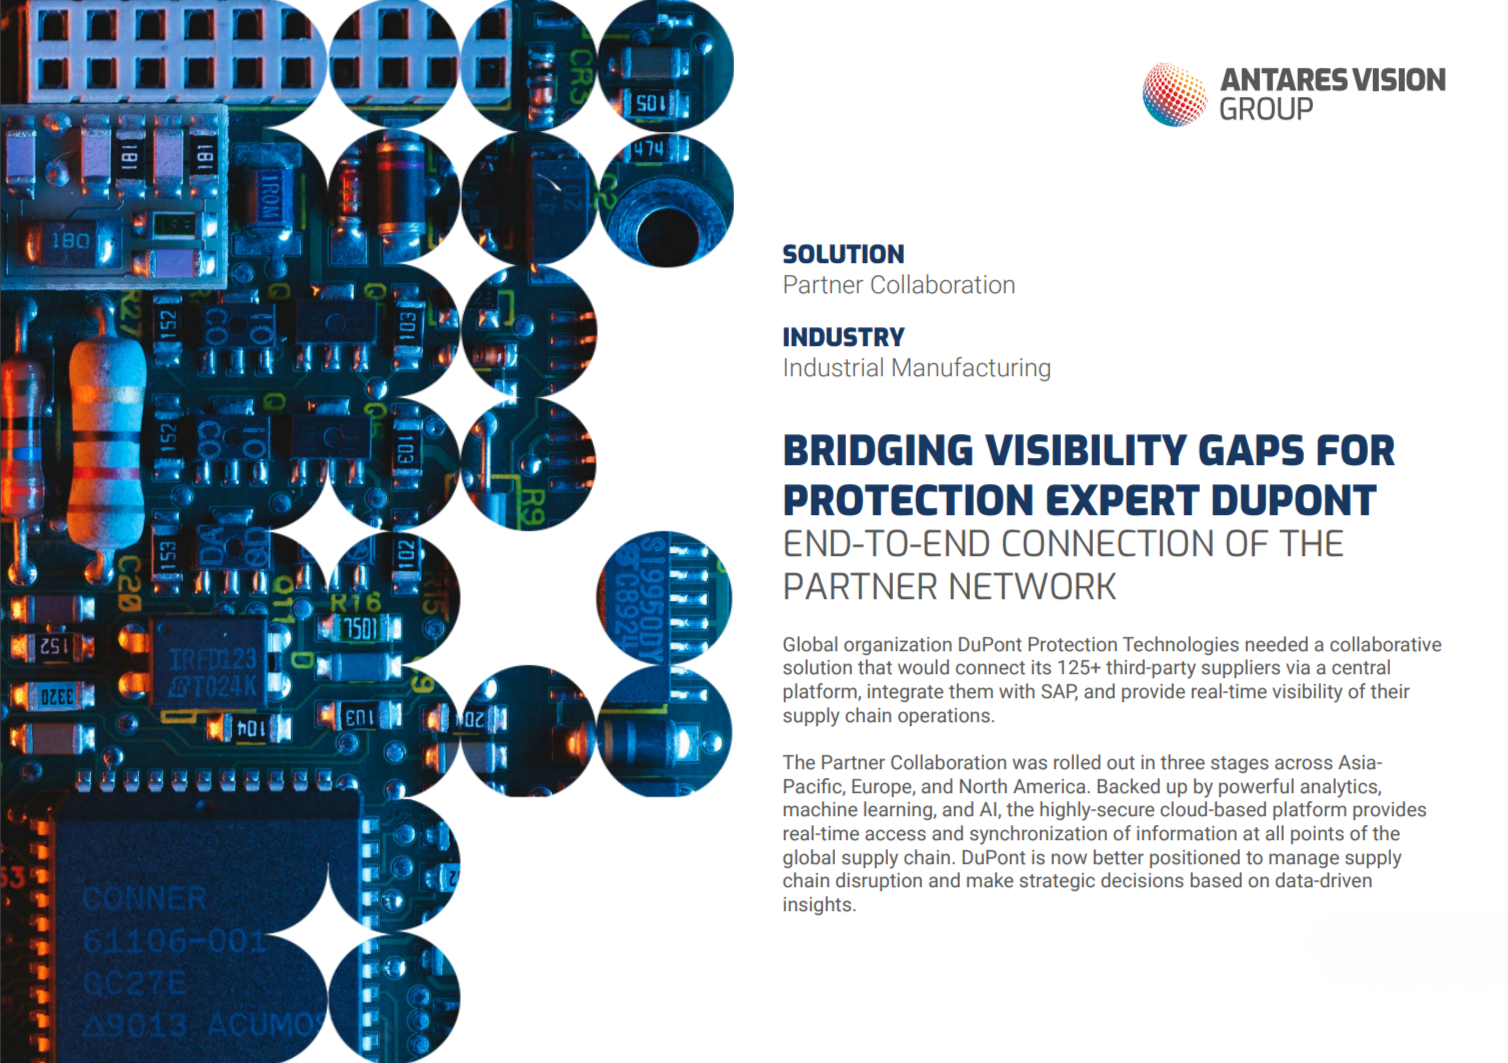 BRIDGING VISIBILITY GAPS FOR PROTECTION EXPERT DUPONT